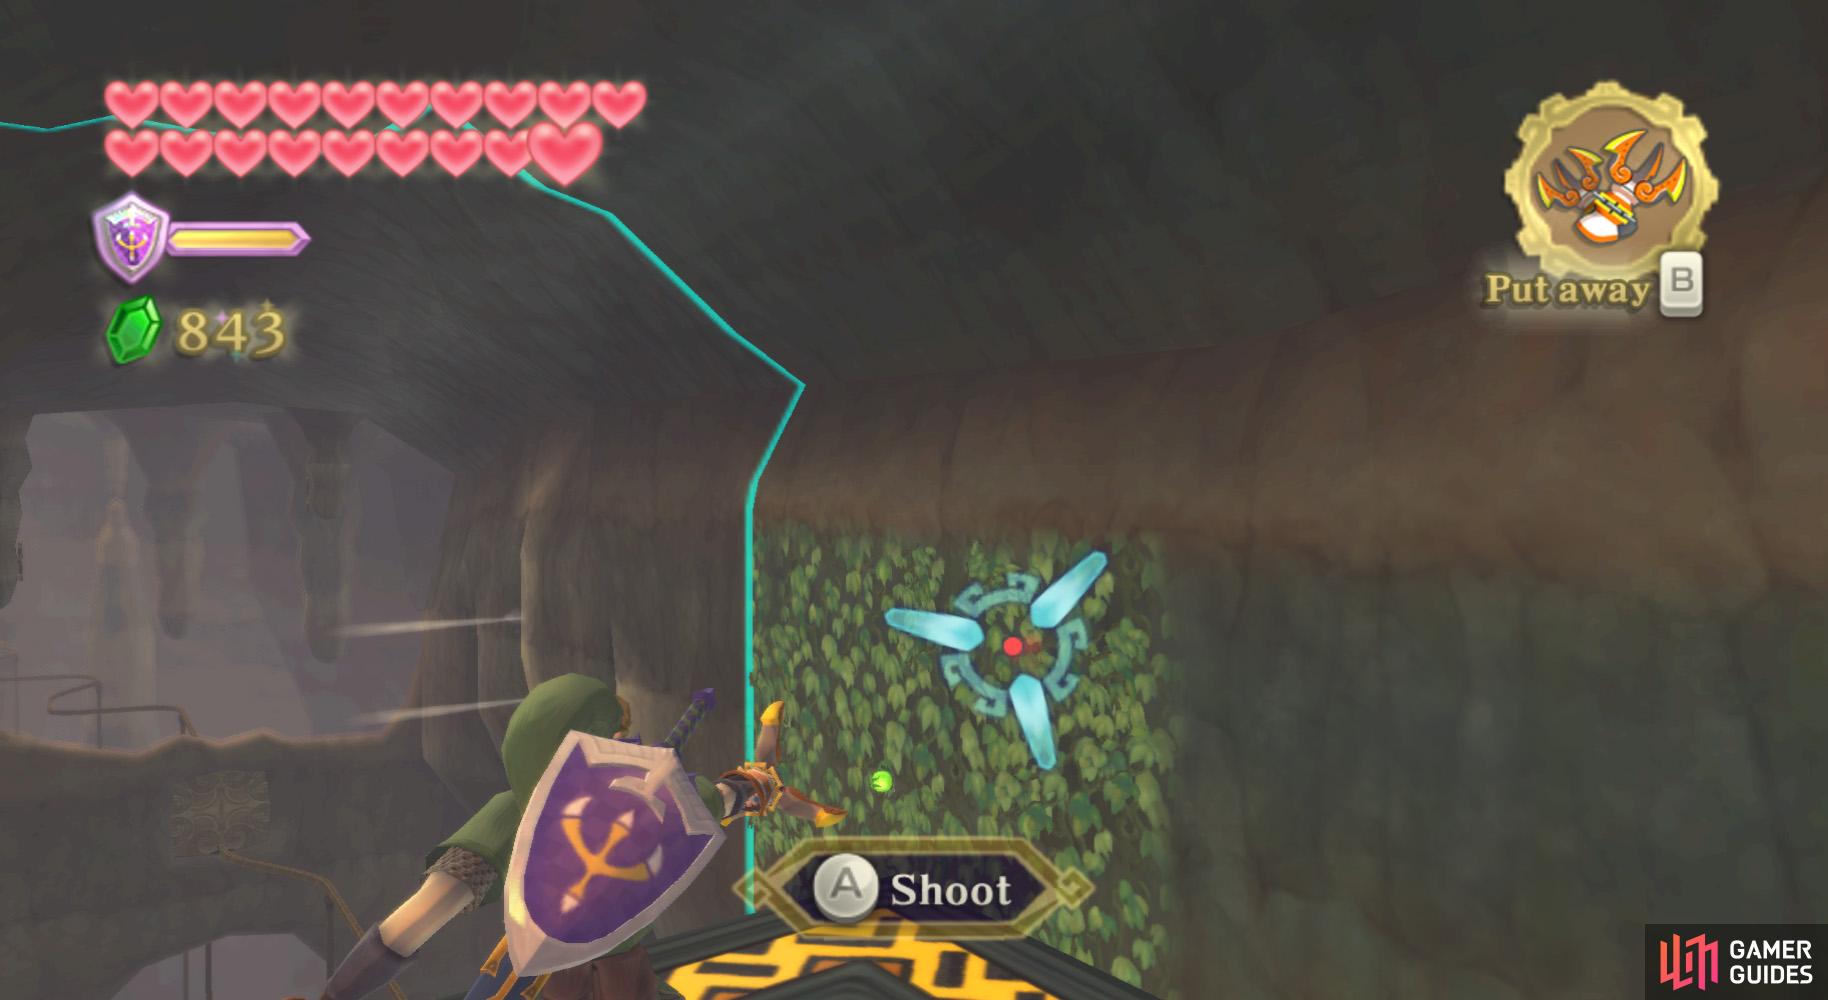 Besides the newly appearing platforms, also look out for vines on the wall.